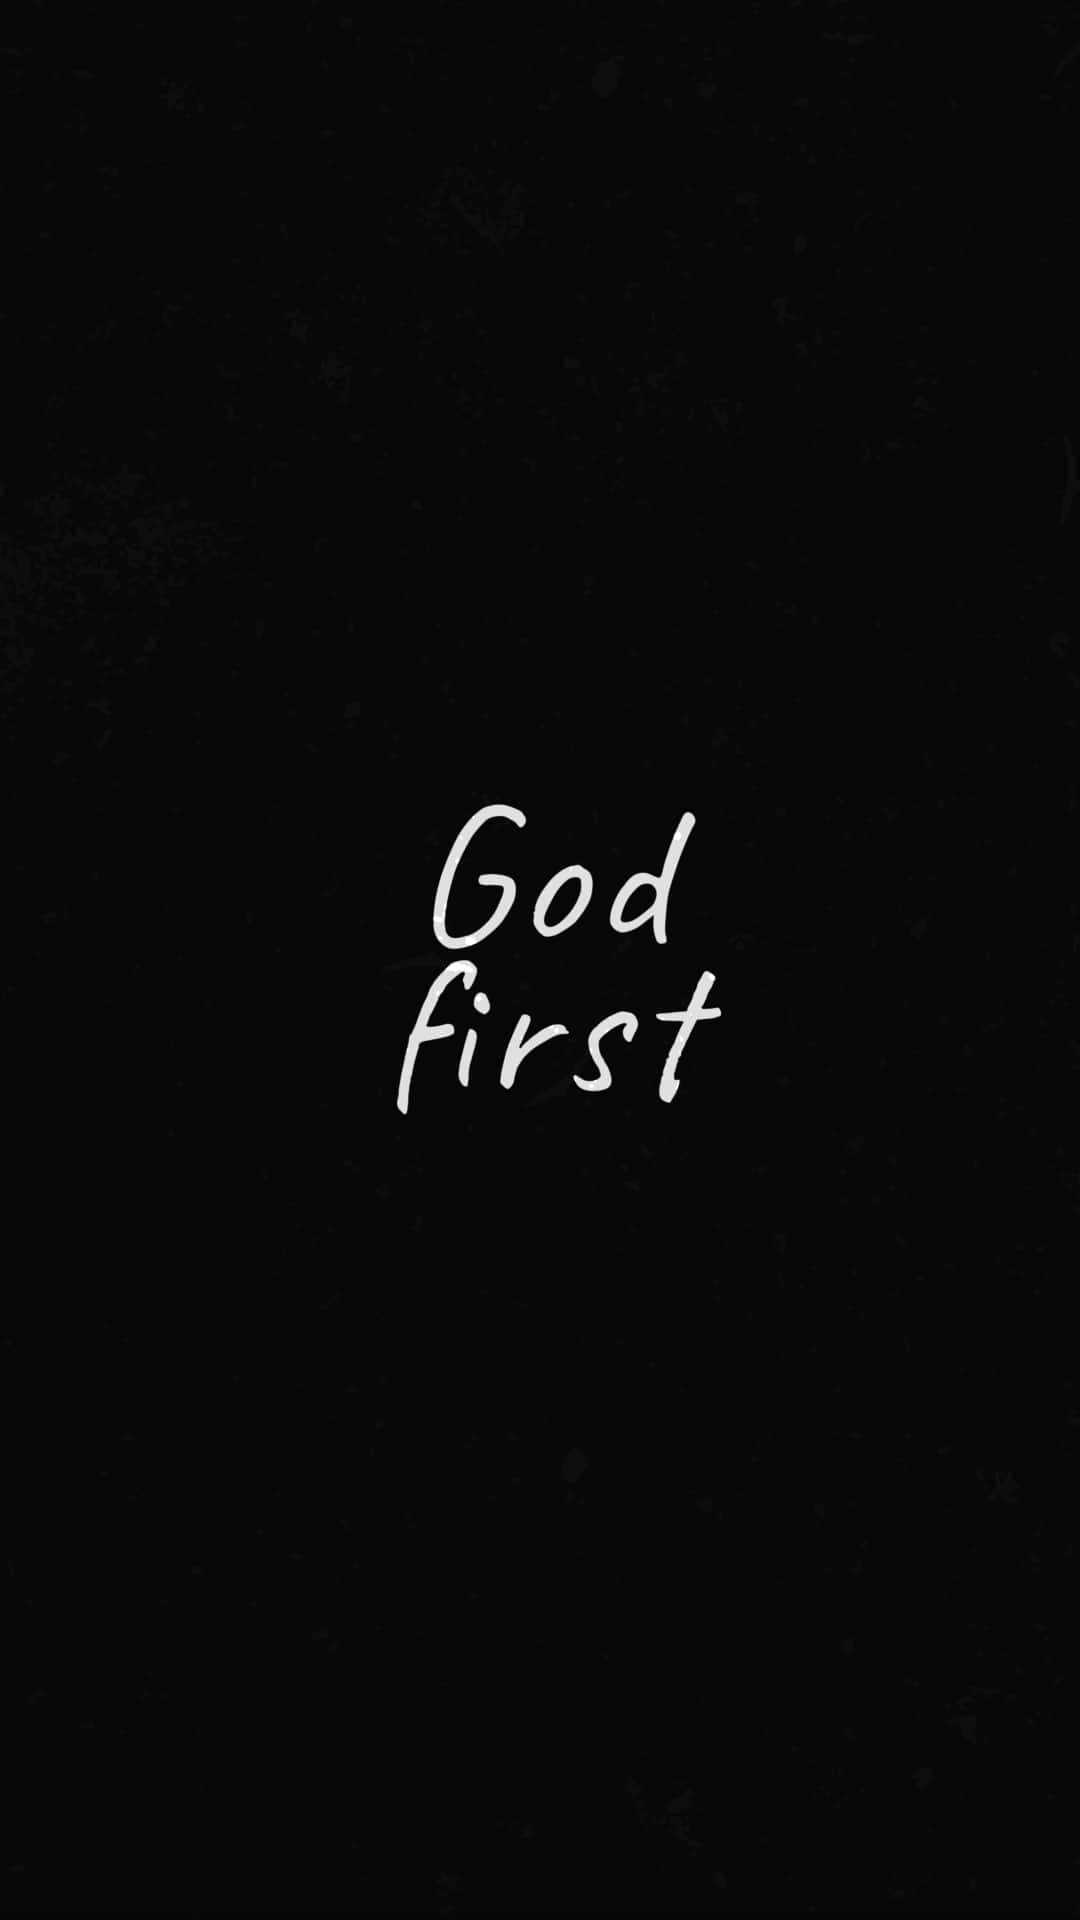 God First Inspirational Quote Wallpaper